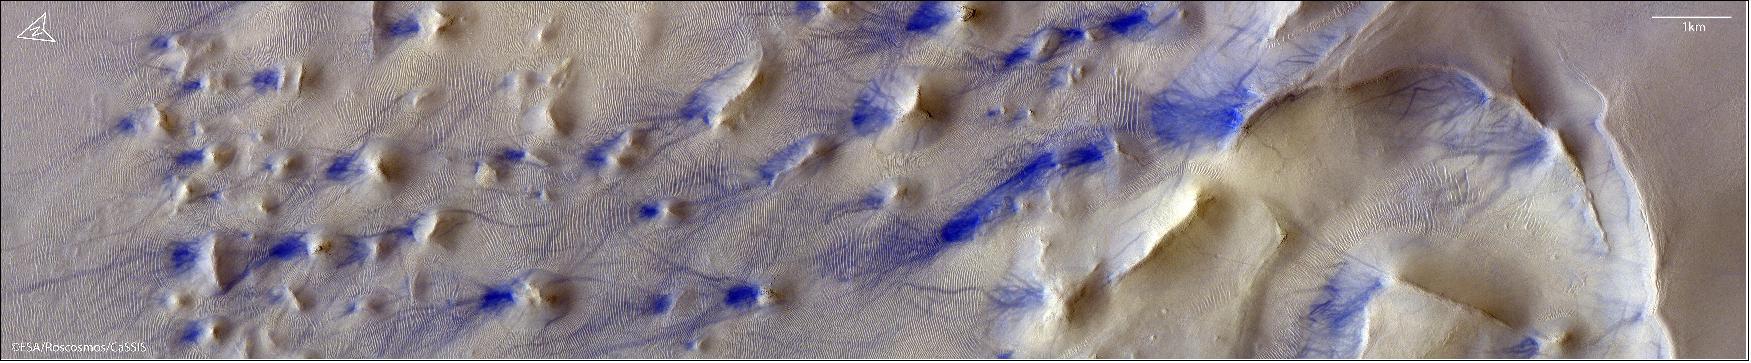 Figure 9: The image was taken by the CaSSIS camera onboard the ESA/Roscosmos ExoMars Trace Gas Orbiter (TGO) on 1 February 2021, and shows part of Argyre Planitia, centred at 46.2ºS/318.3ºE (image credit: ESA/Roscosmos/CaSSIS, CC BY-SA 3.0 IGO)